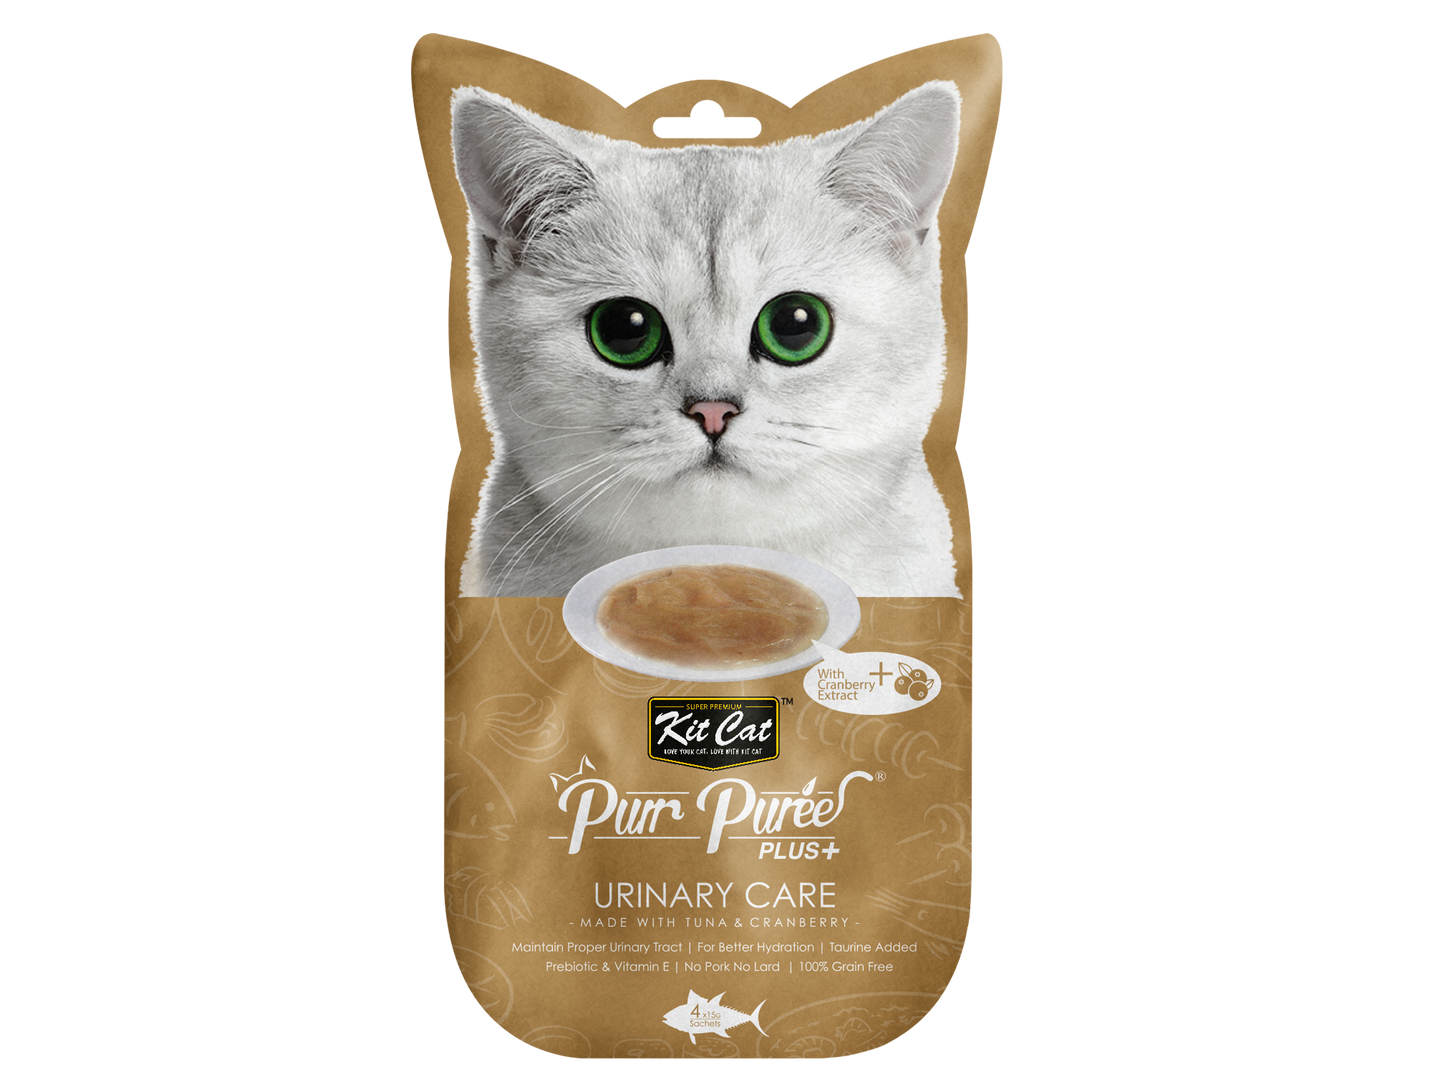 [As Low As $3.30 Each] Kit Cat Purr Puree Plus+ Tuna & Cranberry (Urinary Care) Cat Treat 60g